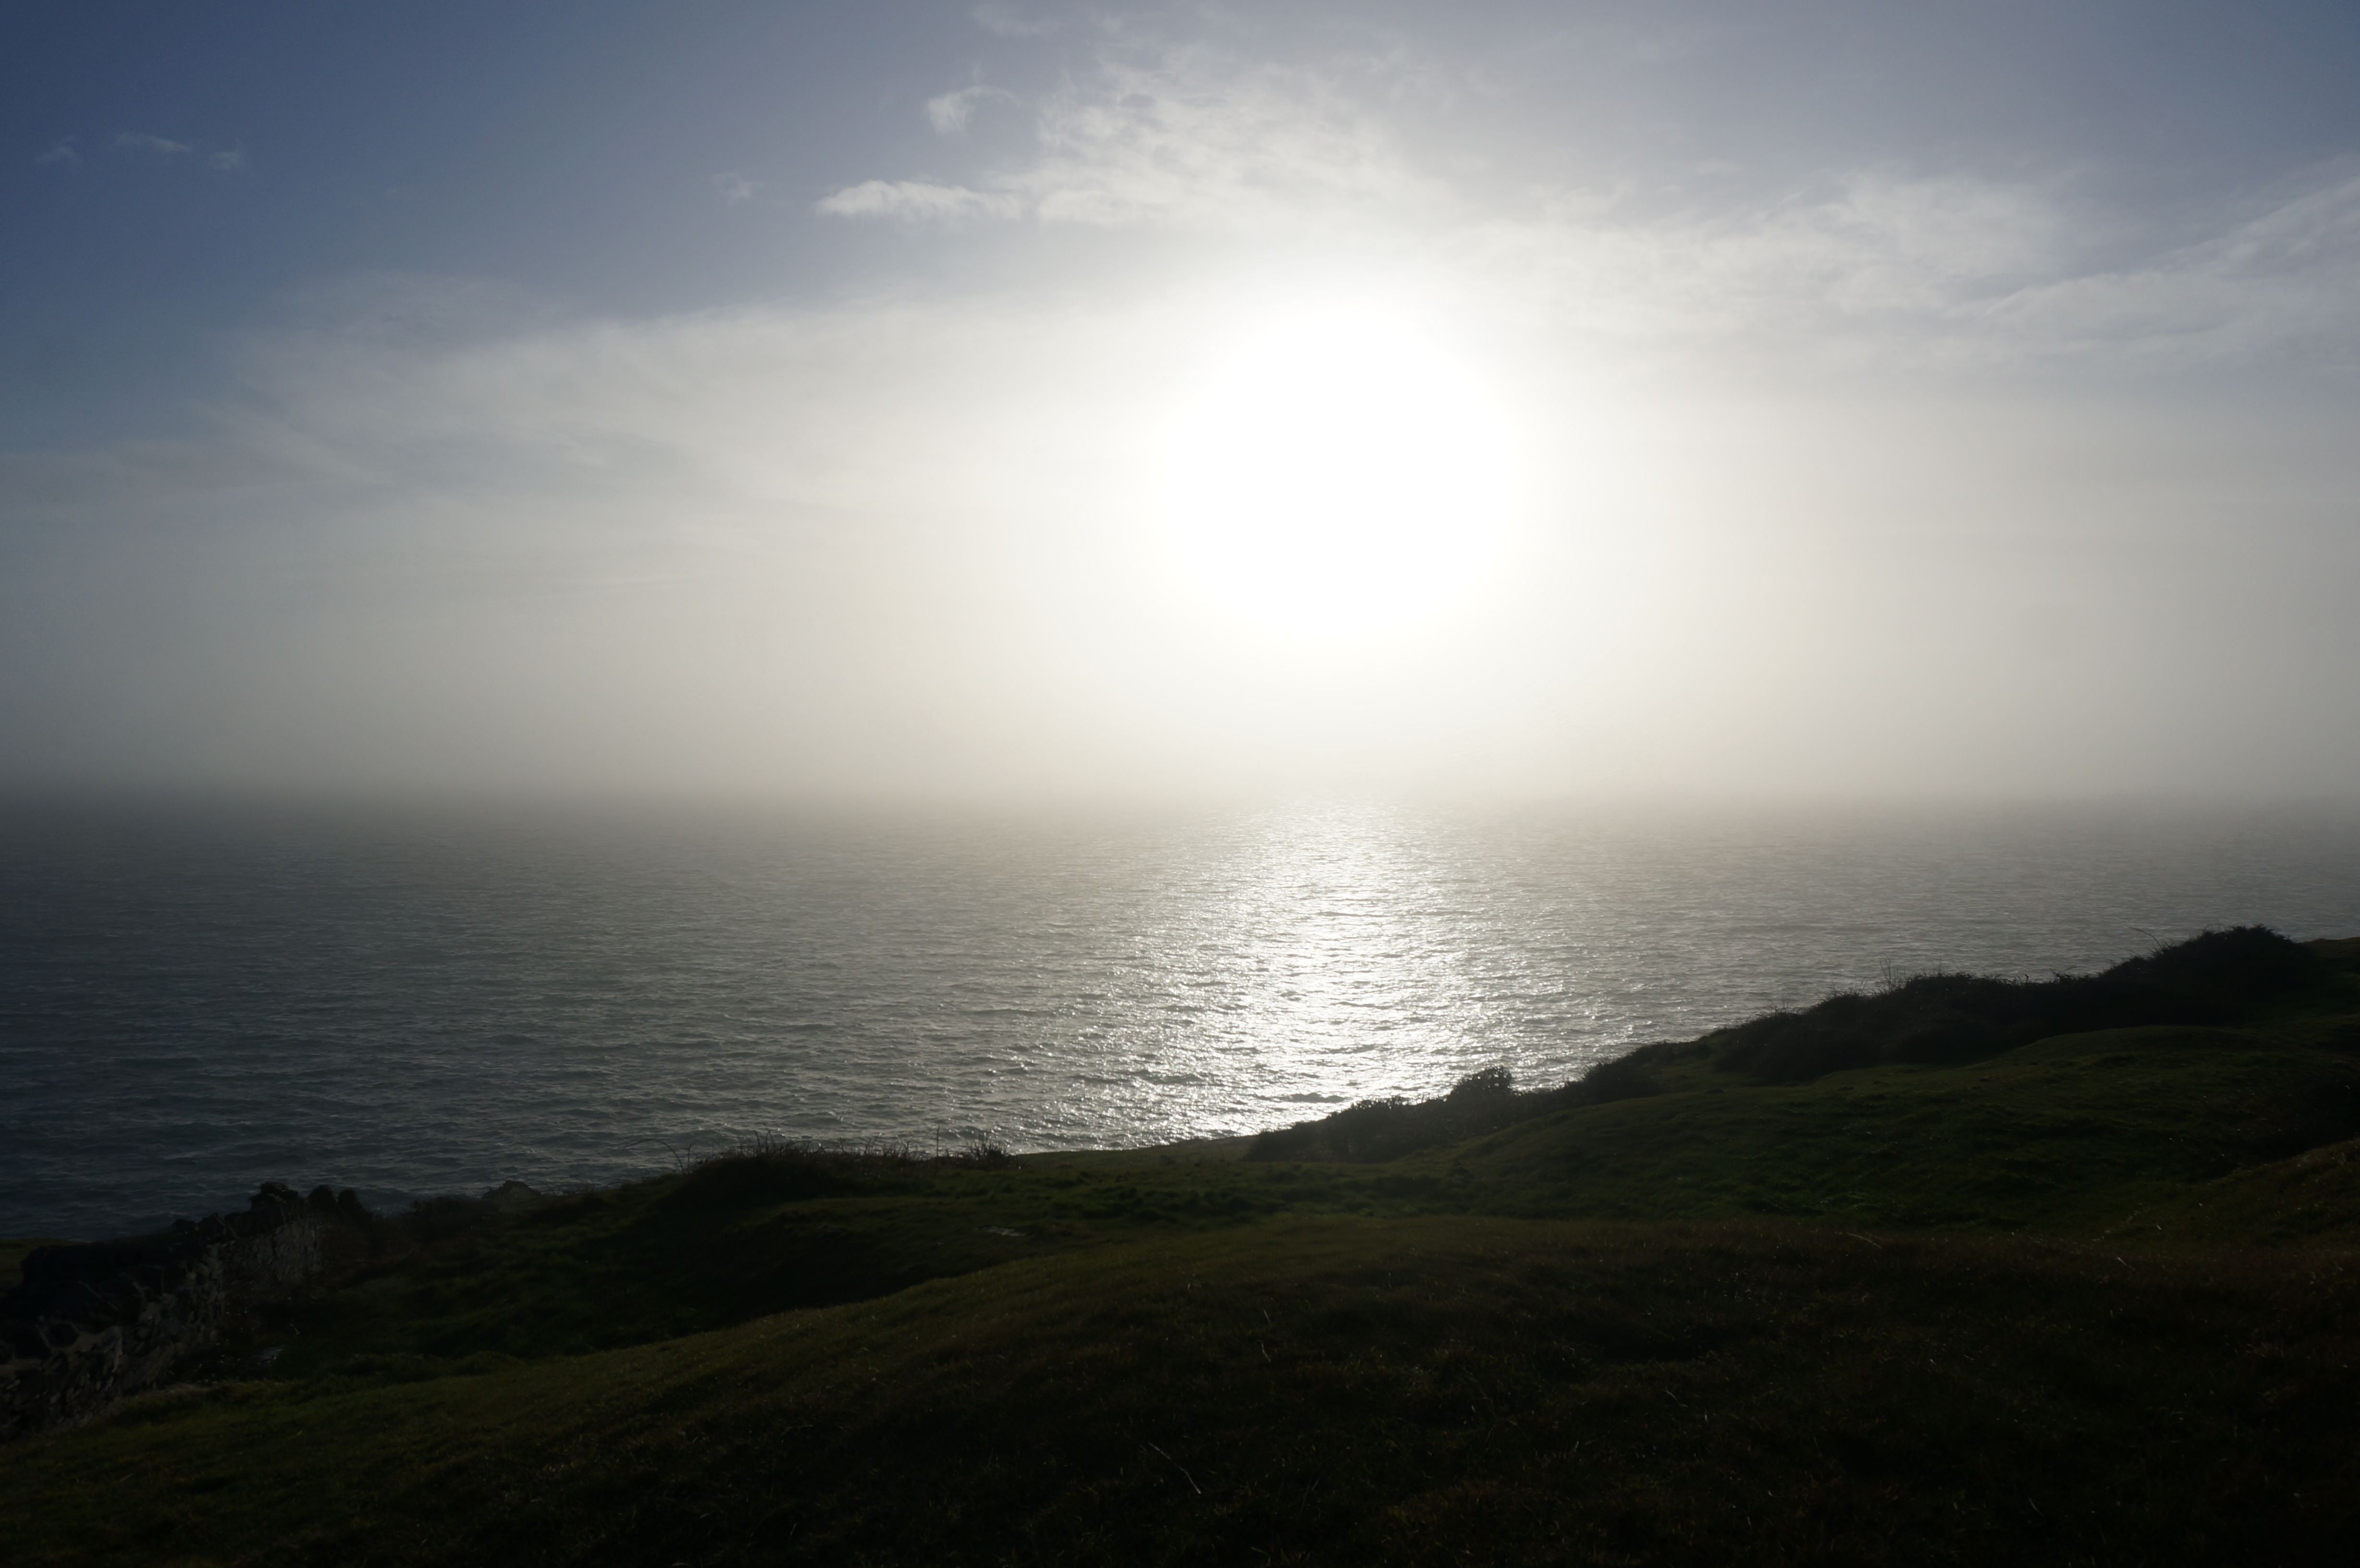 End of the afternoon sunlight on the sea from close to Anvil Point yesterday